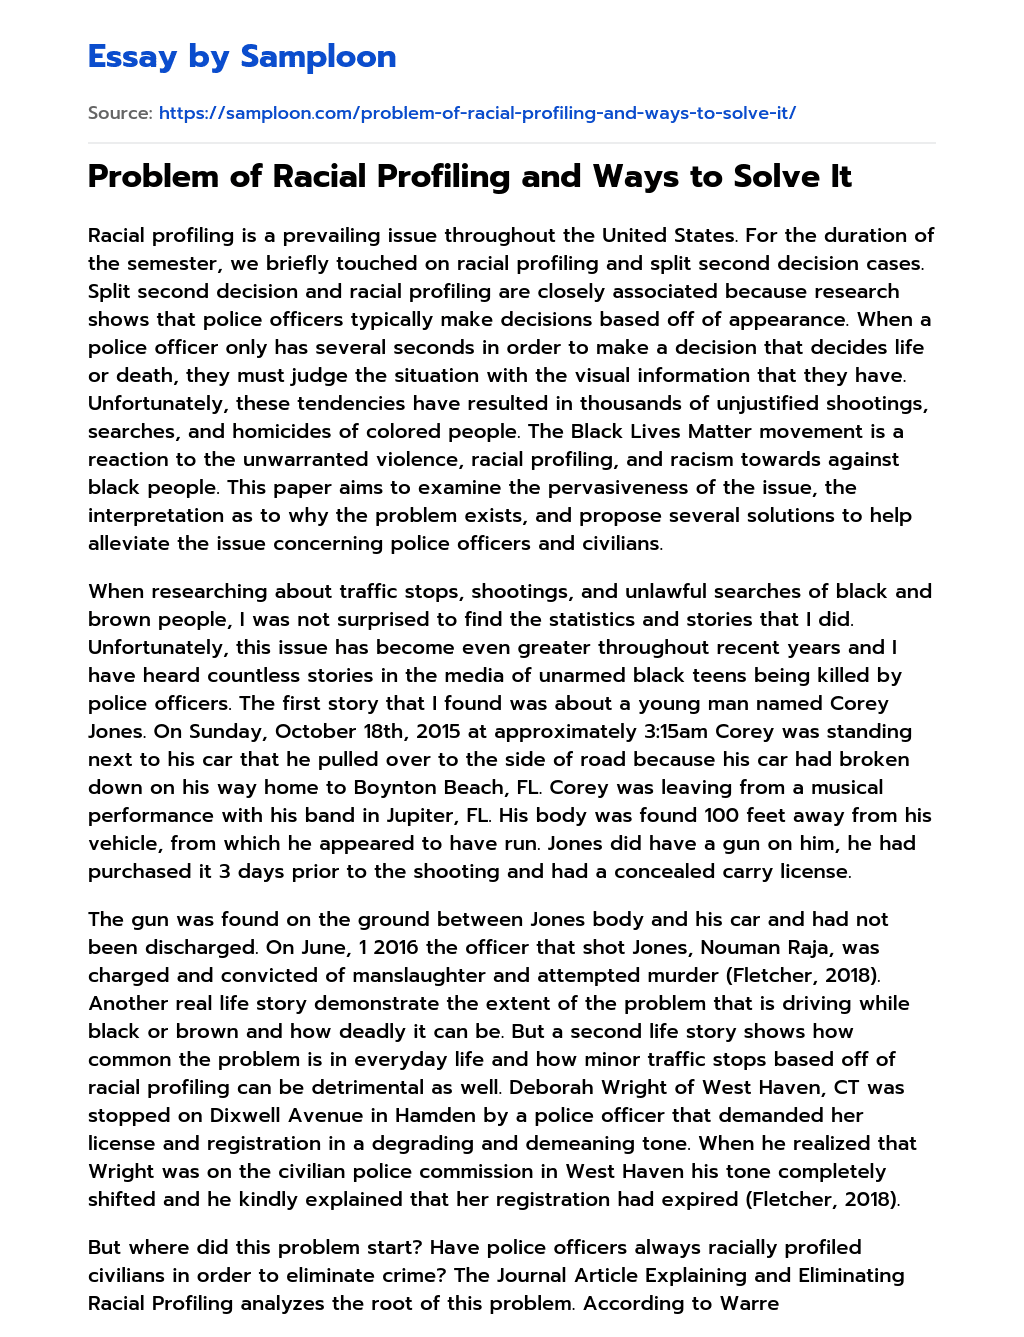 Problem of Racial Profiling and Ways to Solve It essay